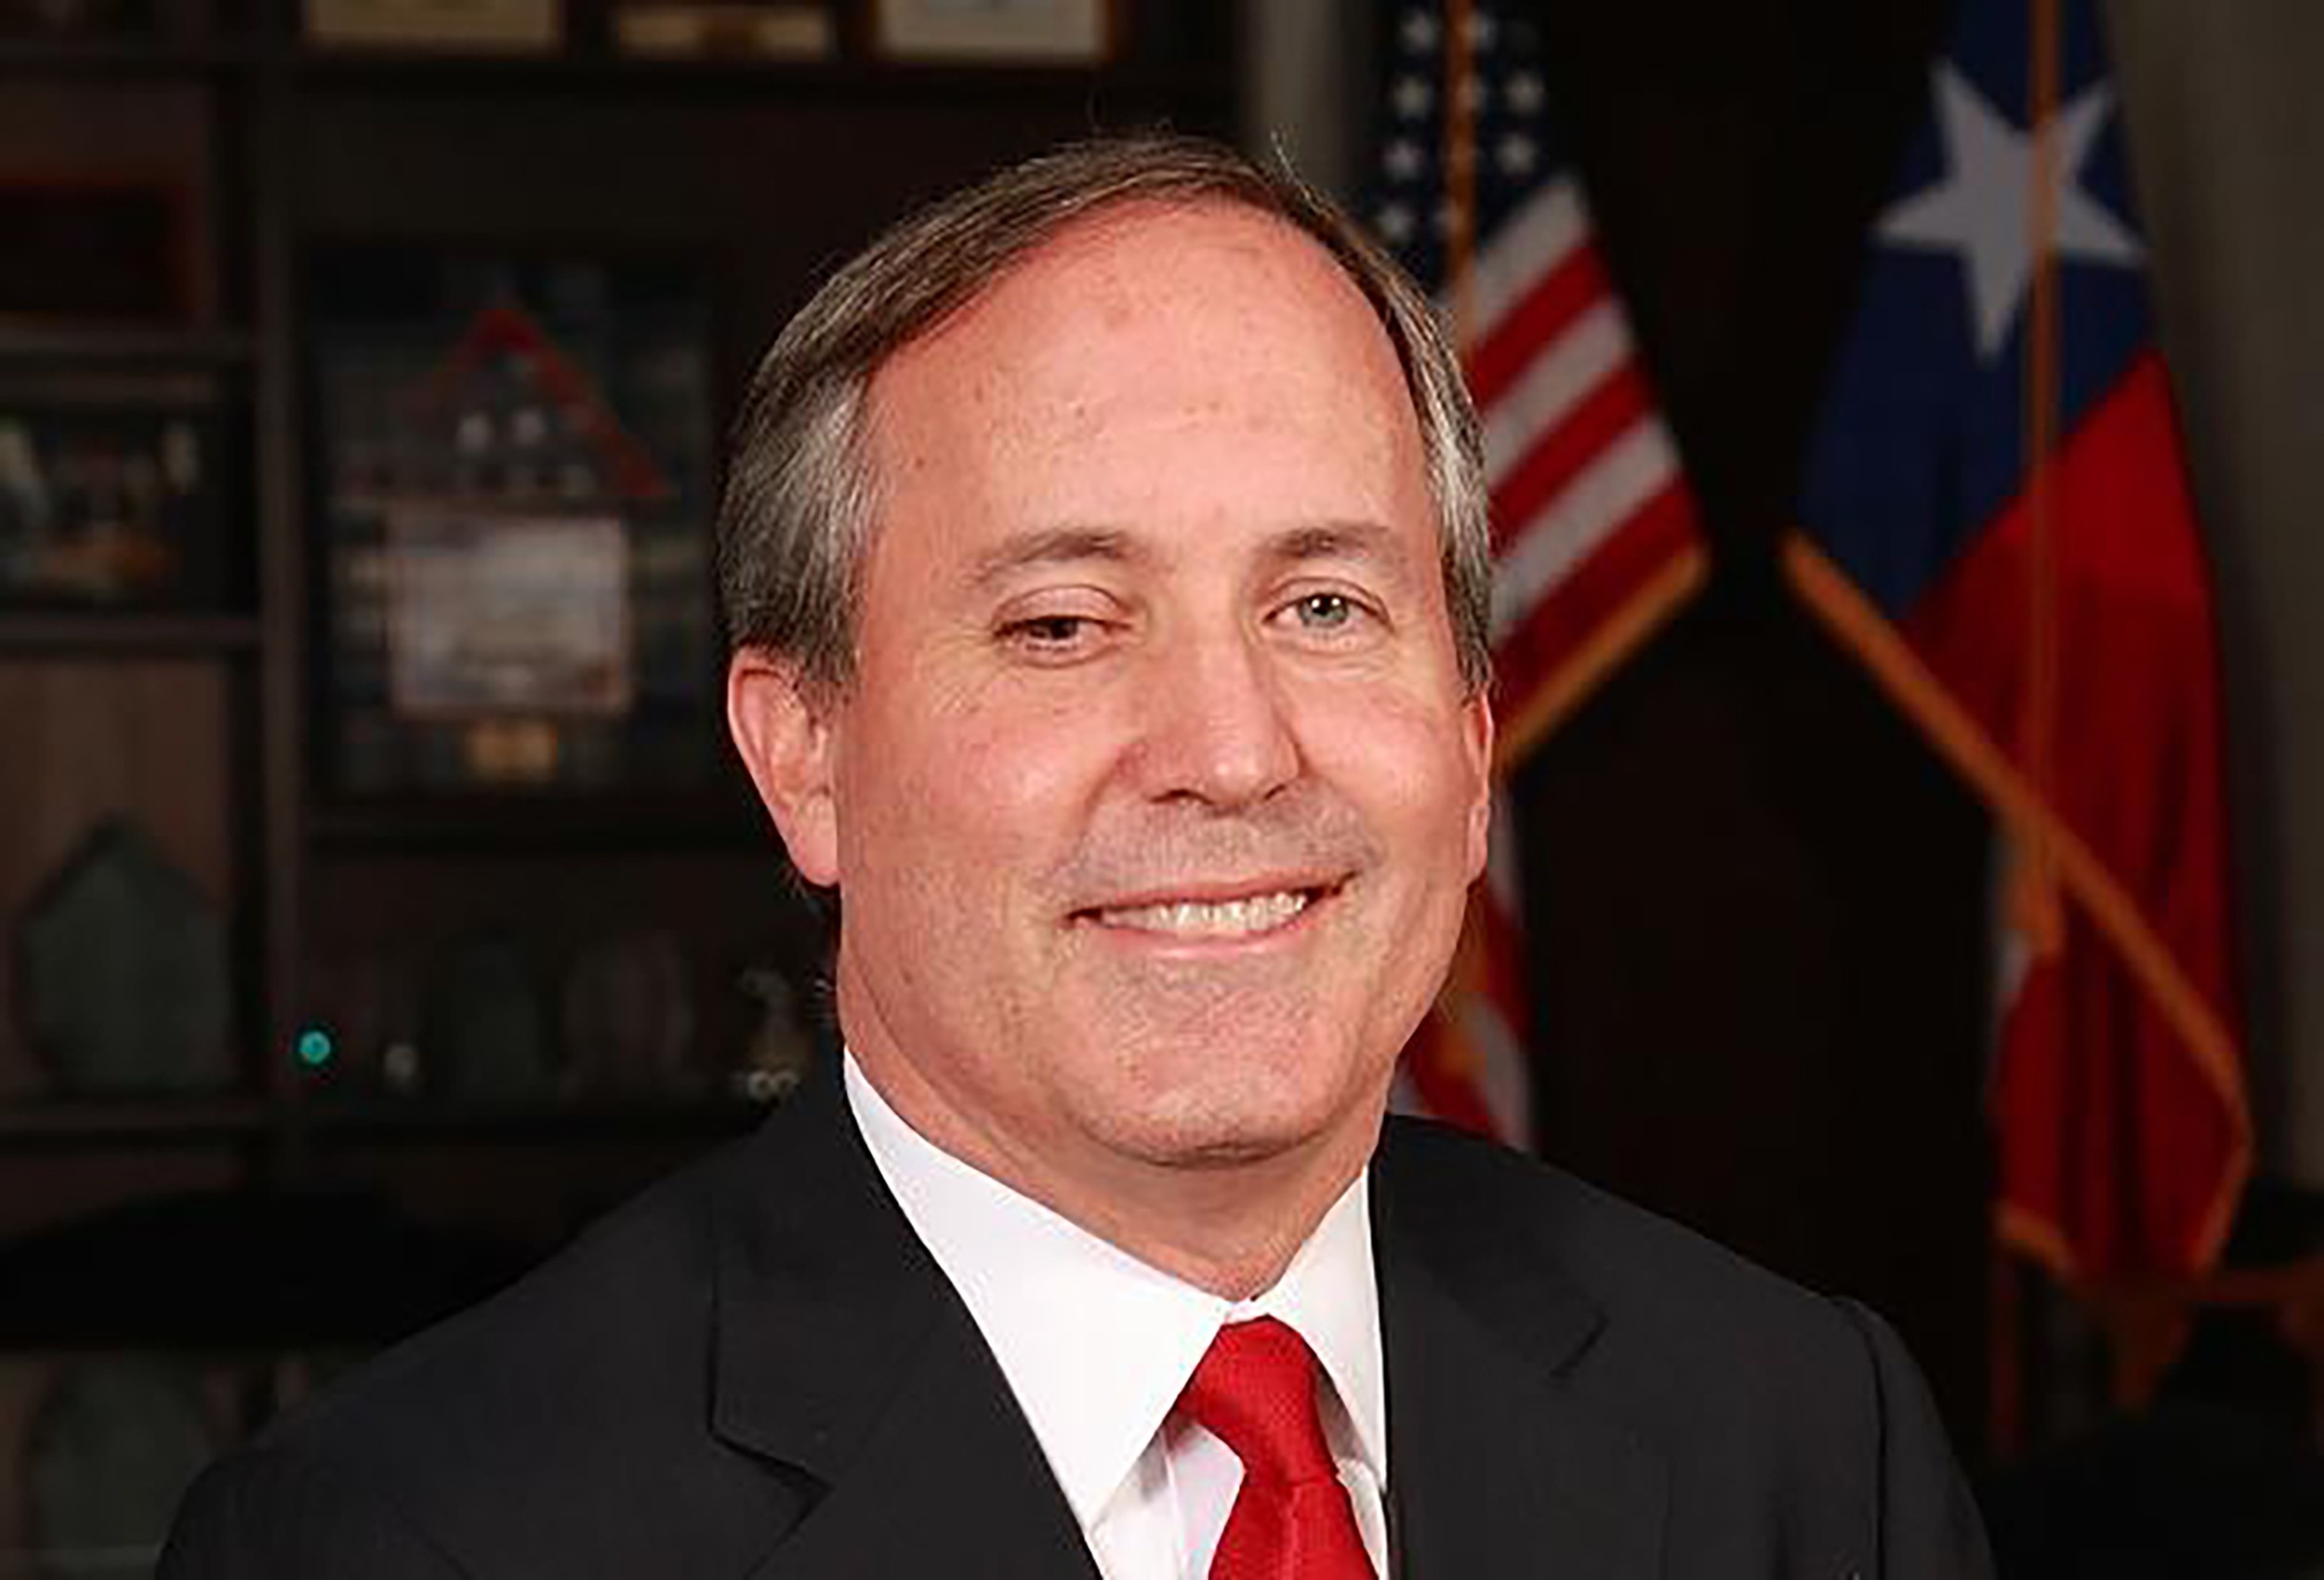 Ken Paxton Questioned by Senate Finance Committee